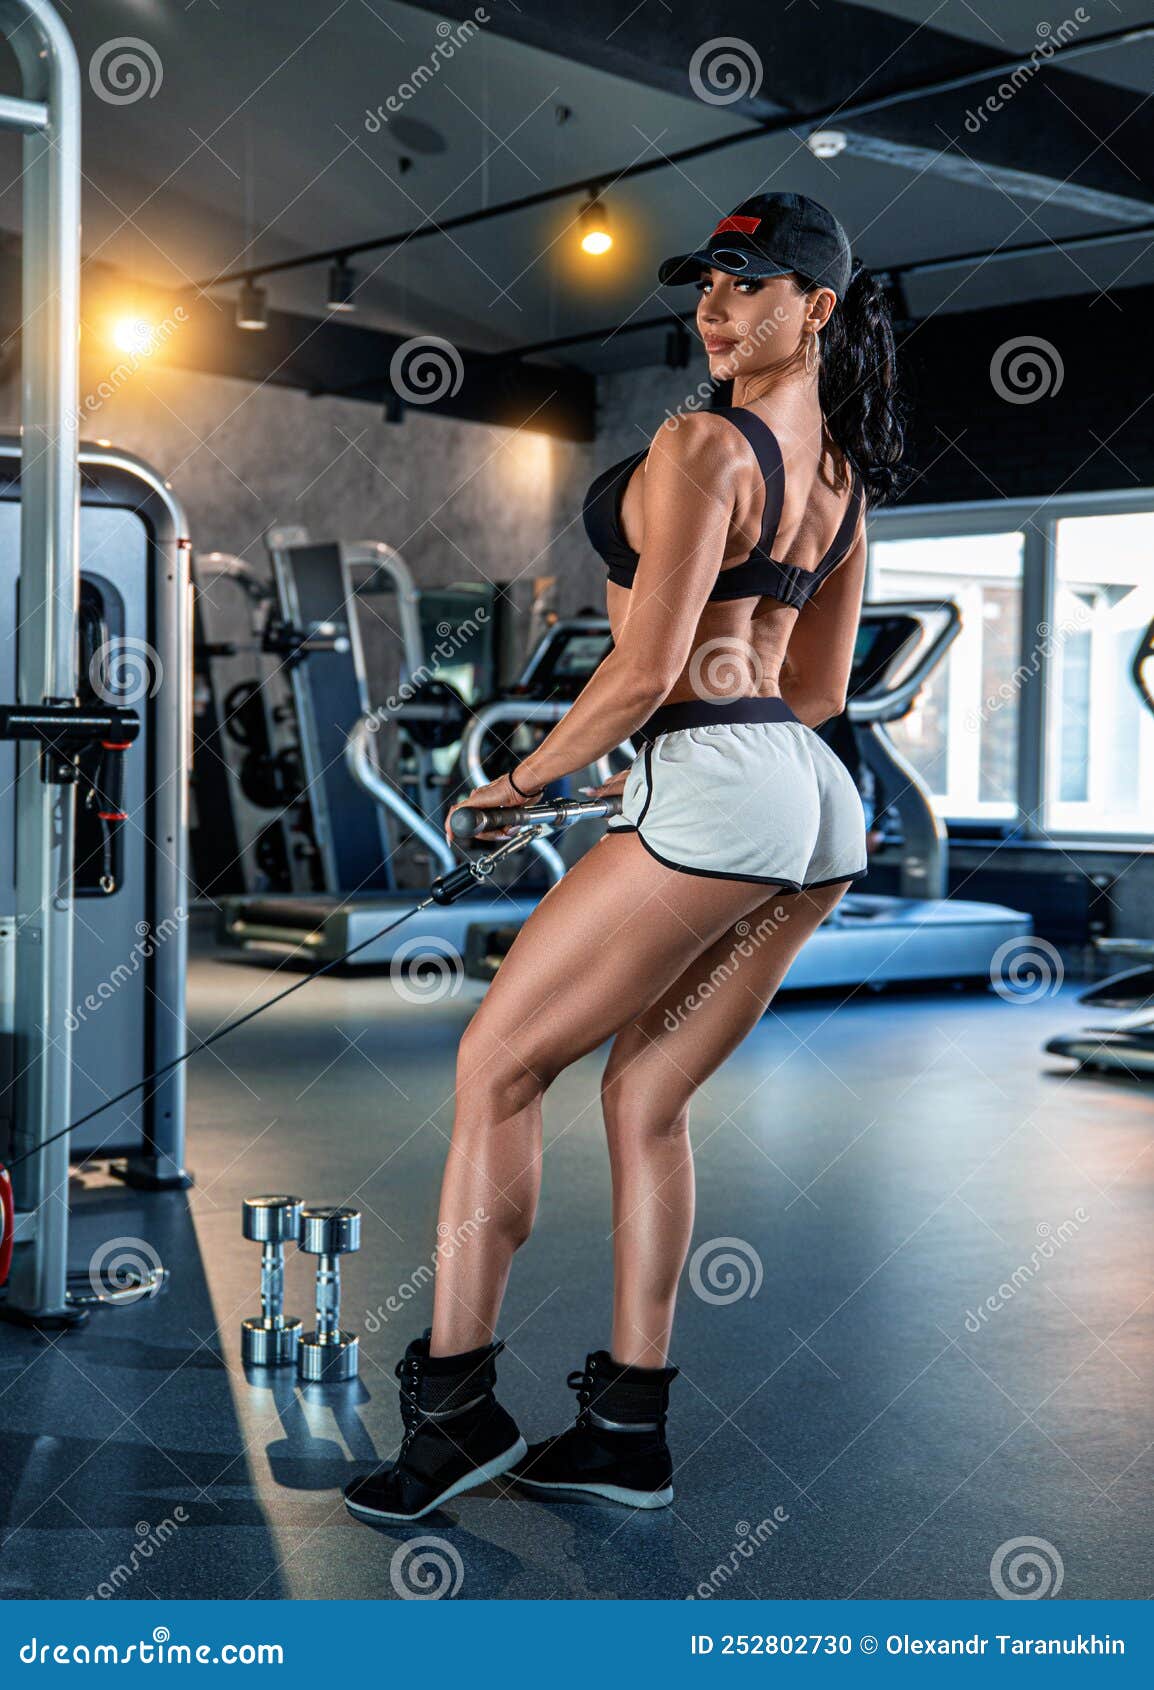 https://thumbs.dreamstime.com/z/beautiful-fitness-brunette-girl-perfect-back-muscles-shapes-posing-gym-beautiful-fitness-brunette-girl-252802730.jpg